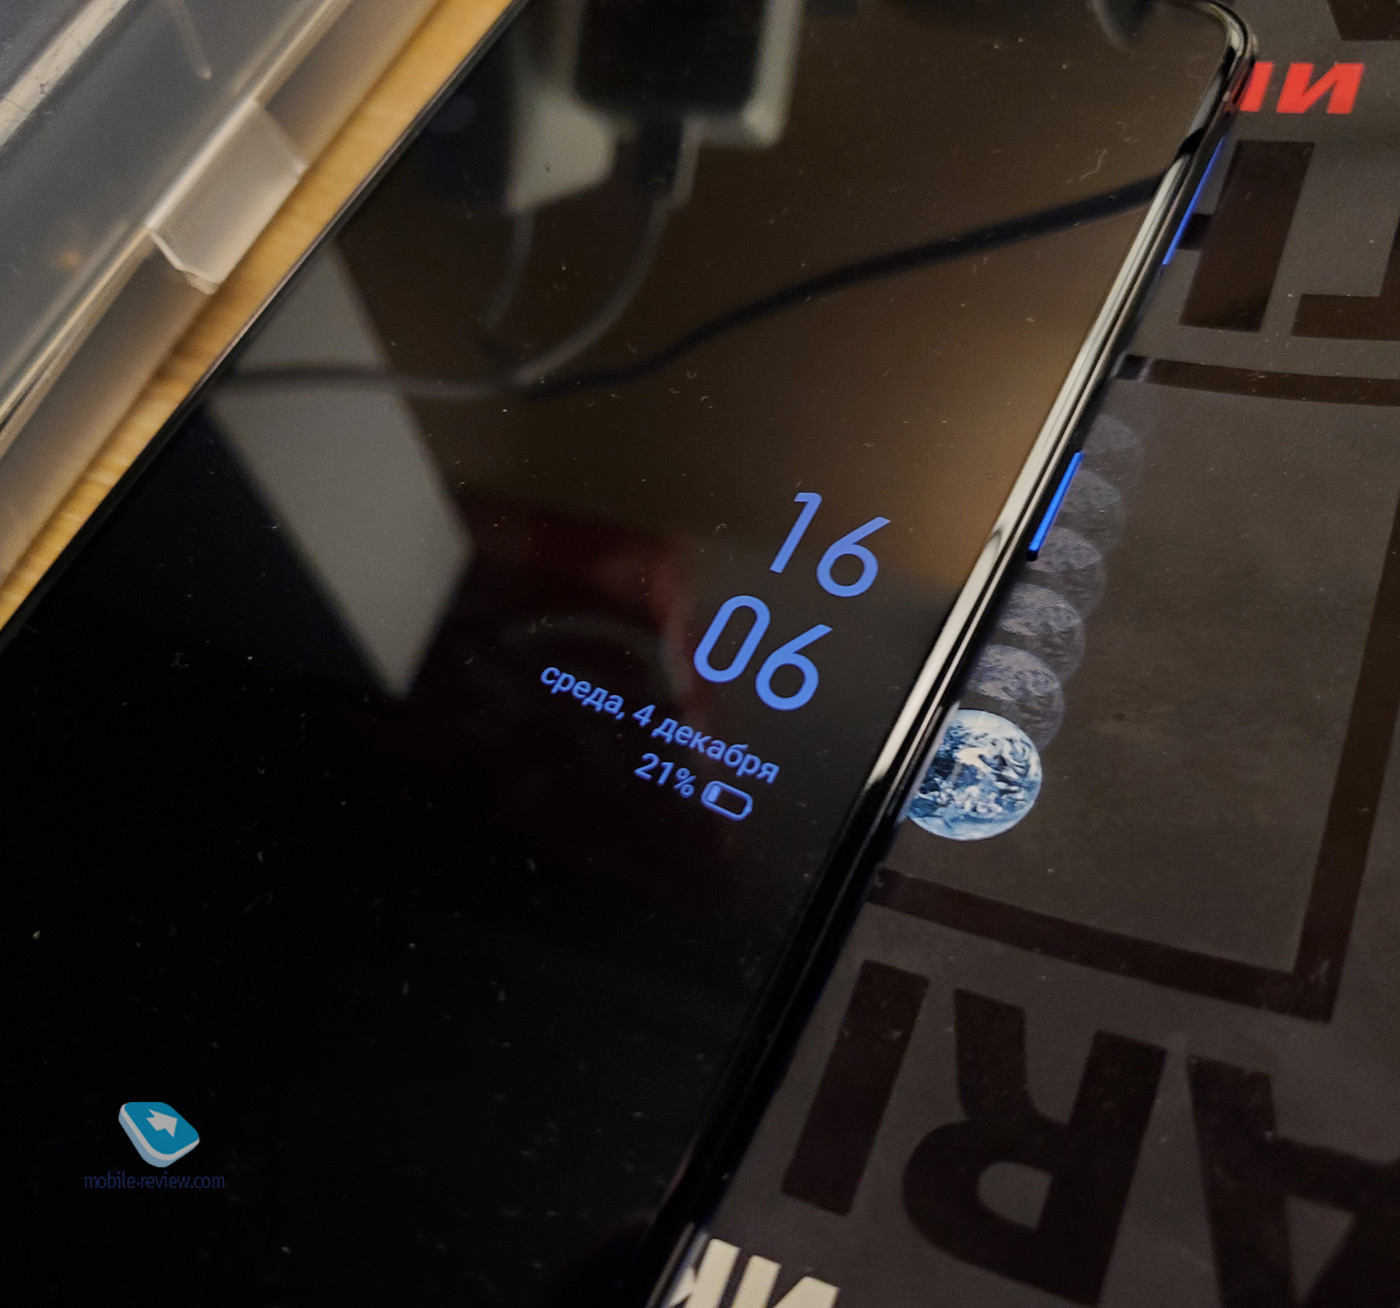 Review of Realme X2 Pro (RMX1931) smartphone